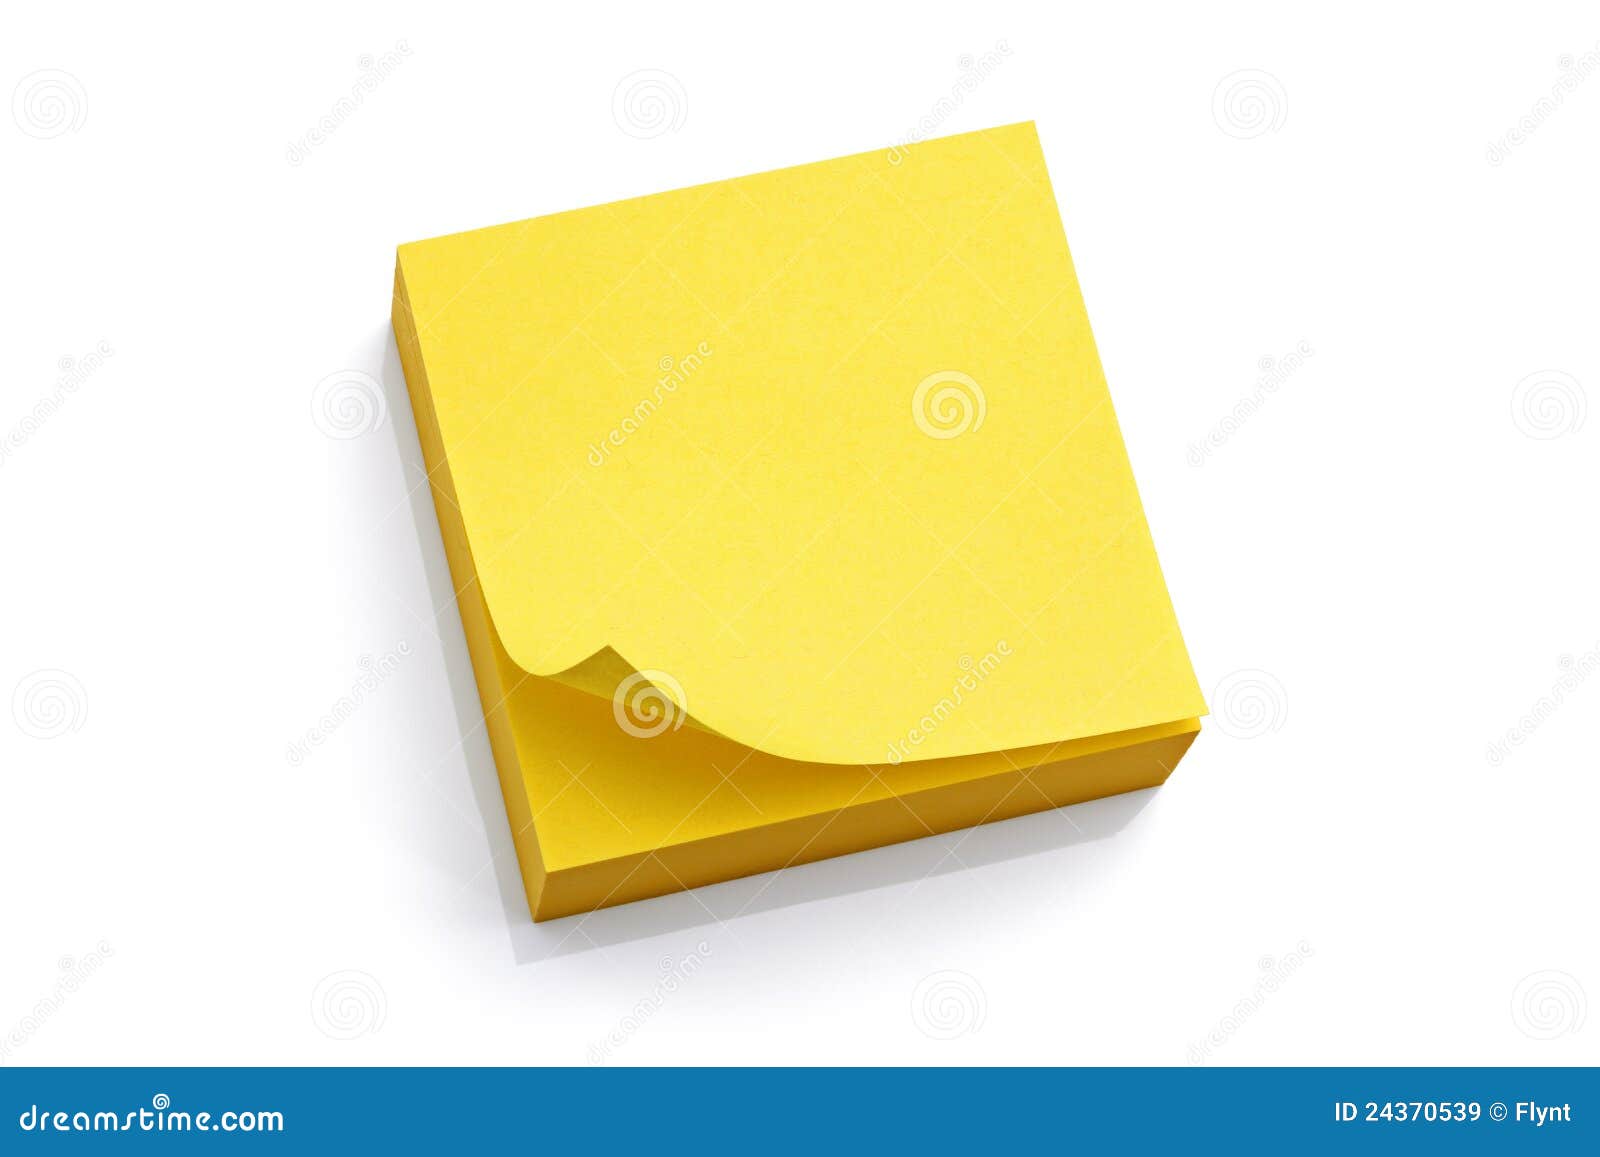 blank yellow sticky note